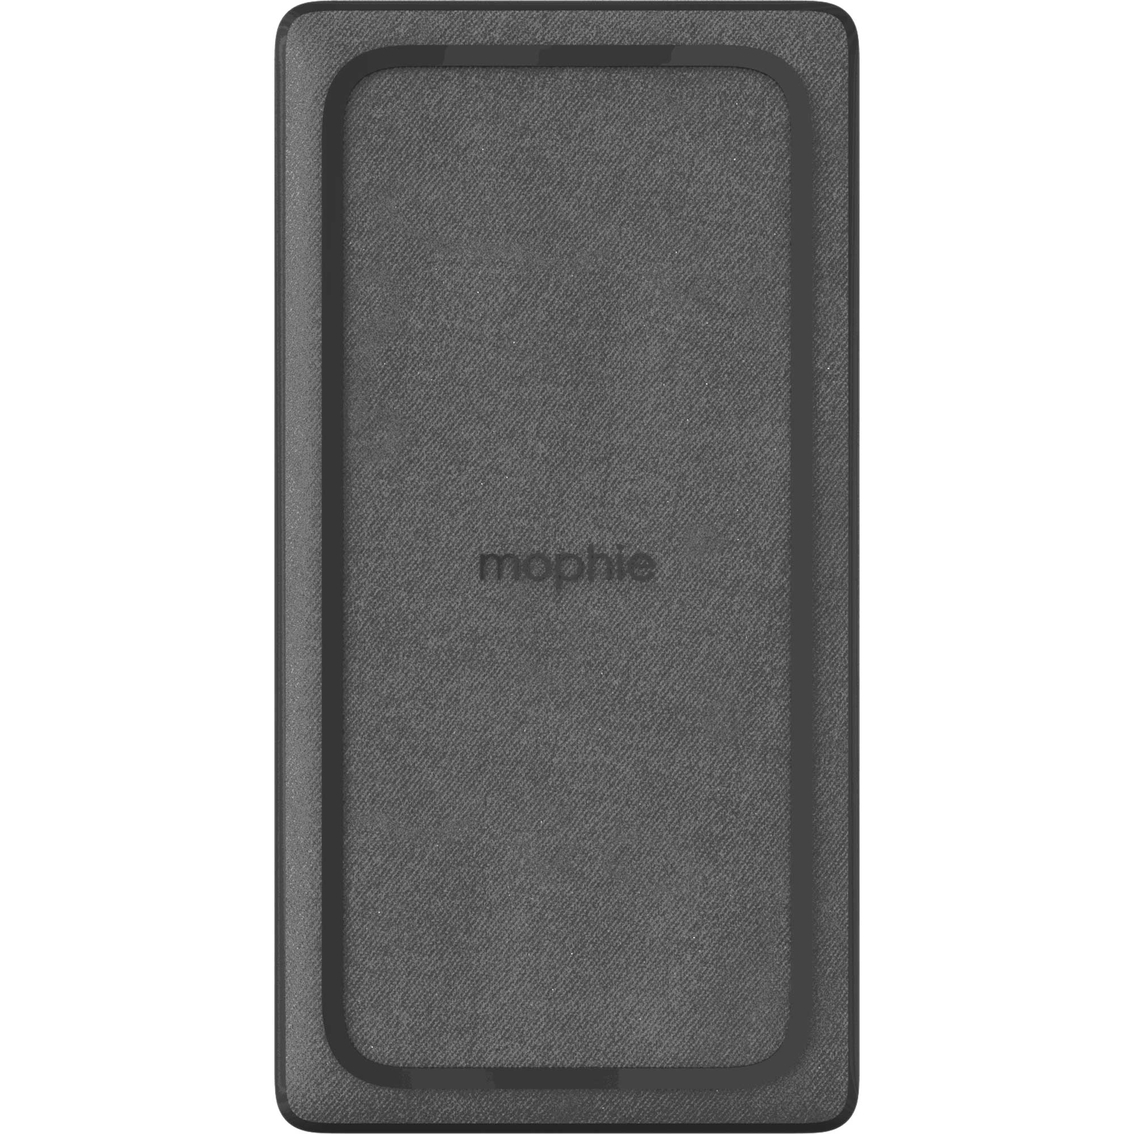 Mophie Powerstation Wireless XL 10kmAh PD Fast Charger - Image 2 of 3